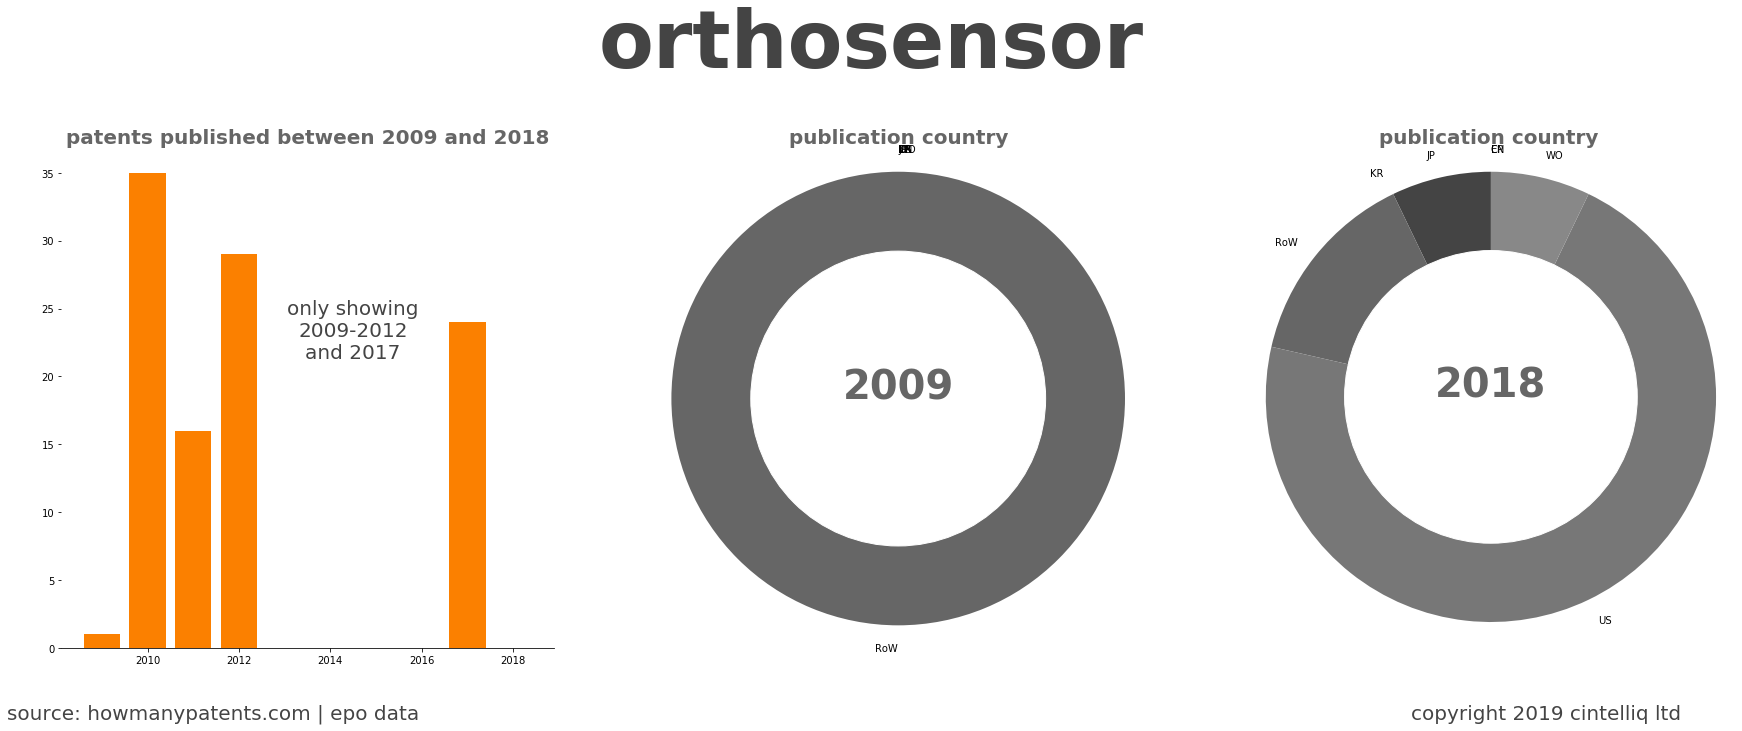 summary of patents for Orthosensor